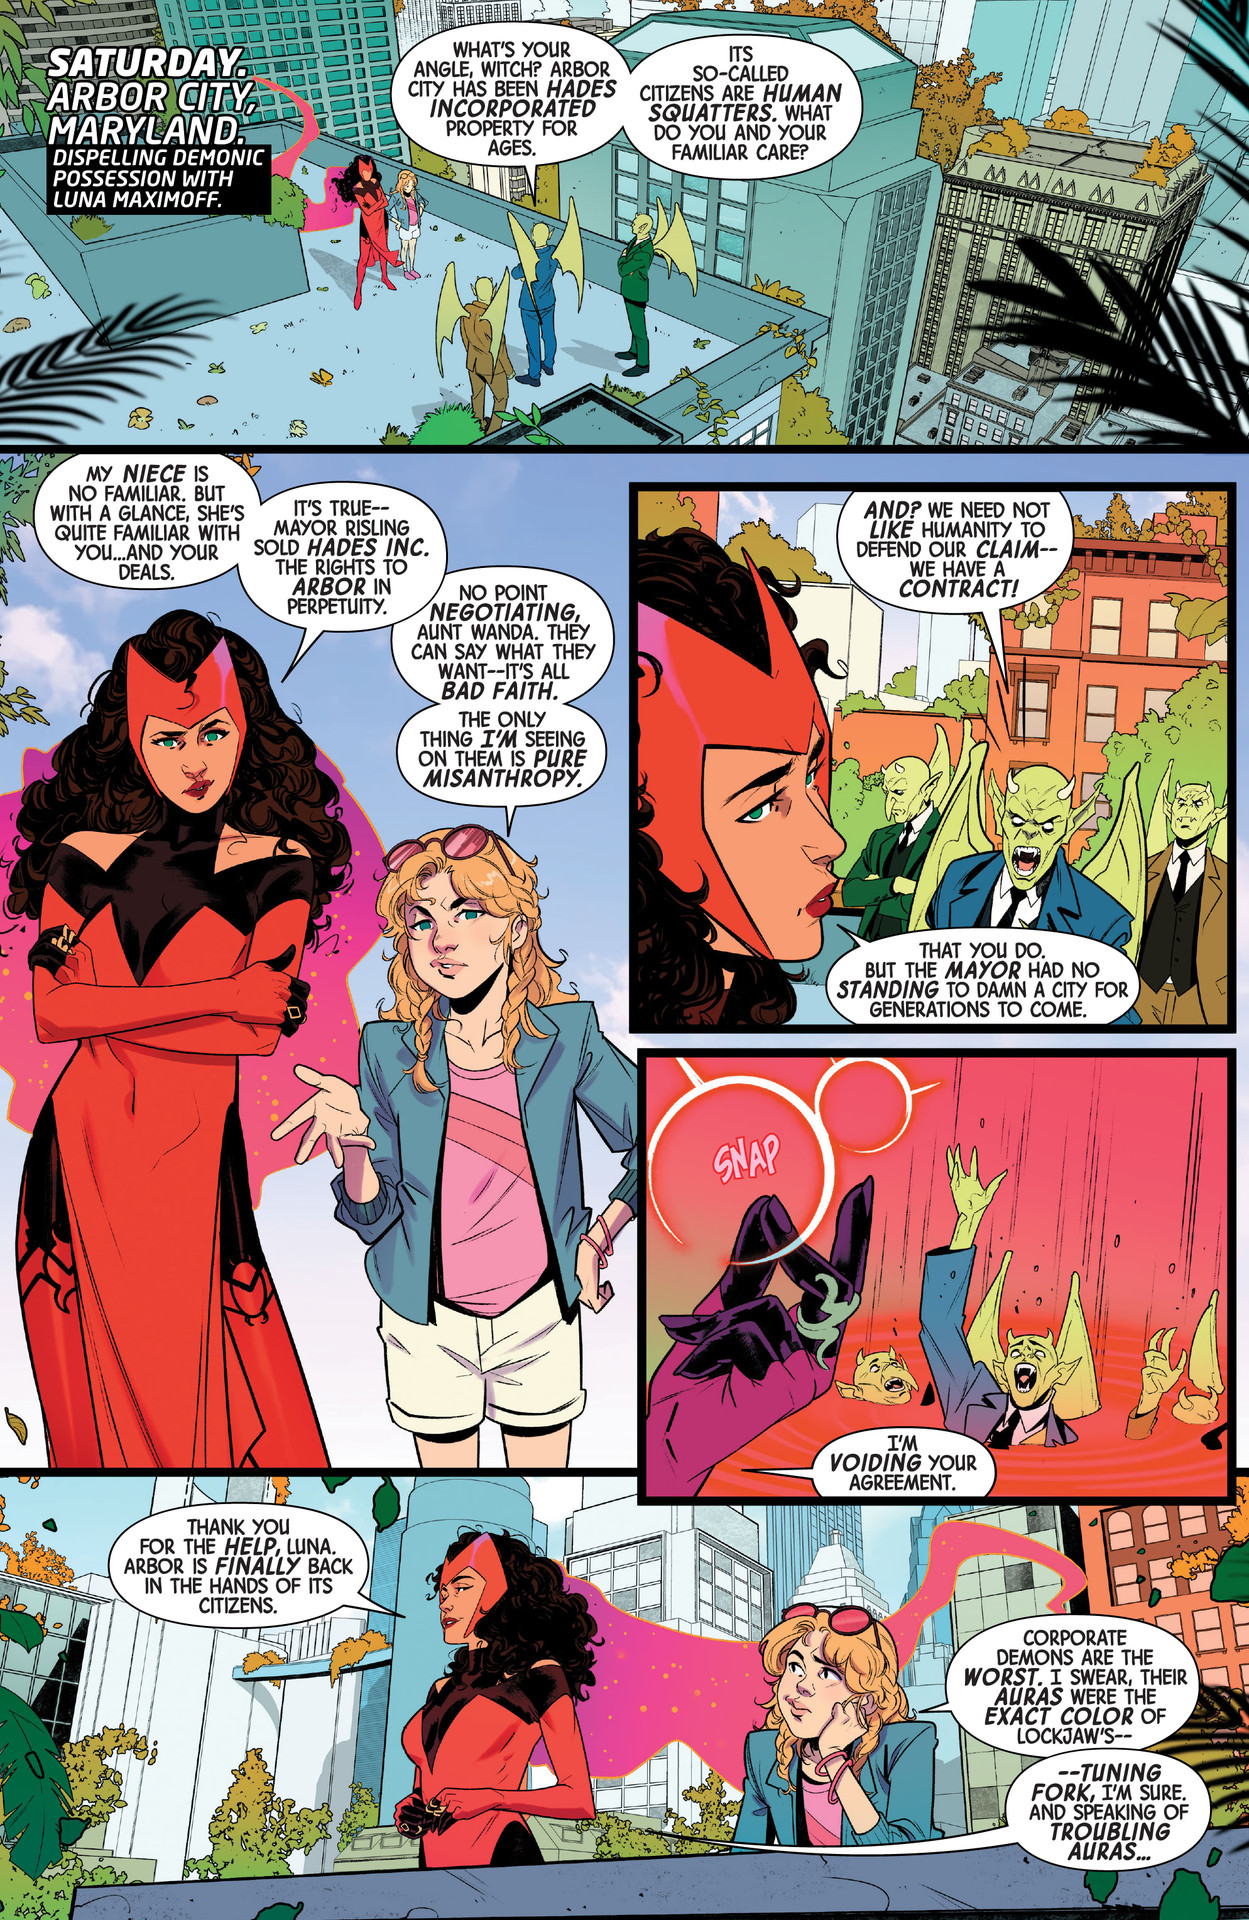 SCARLET WITCH: Page 12 of 12